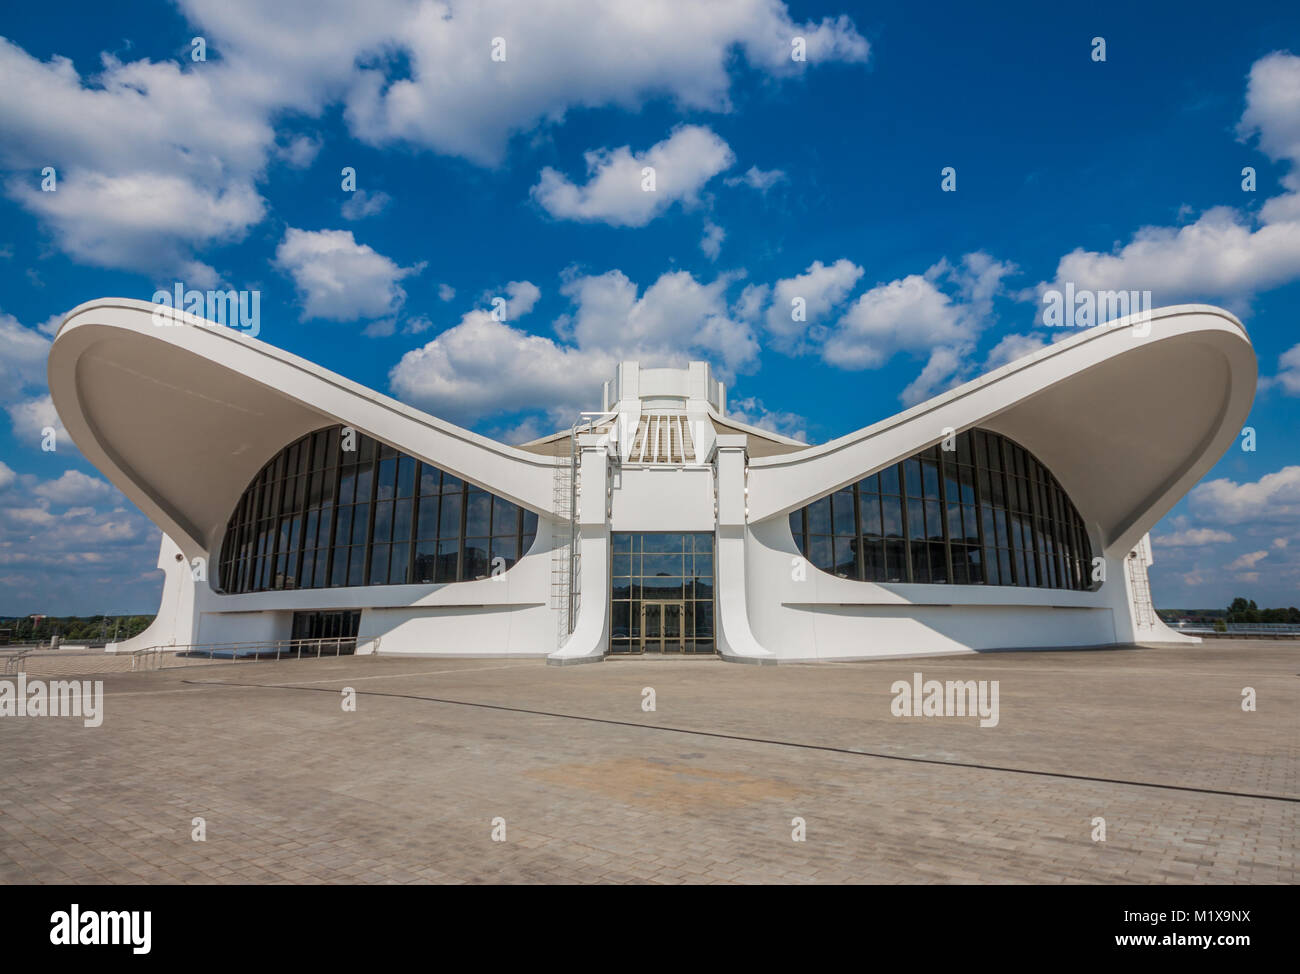 Minsk, Belarus - between Russia, Poland and Ukraine, this small state is a surprising mix of soviet heritage and 21st century modernity Stock Photo